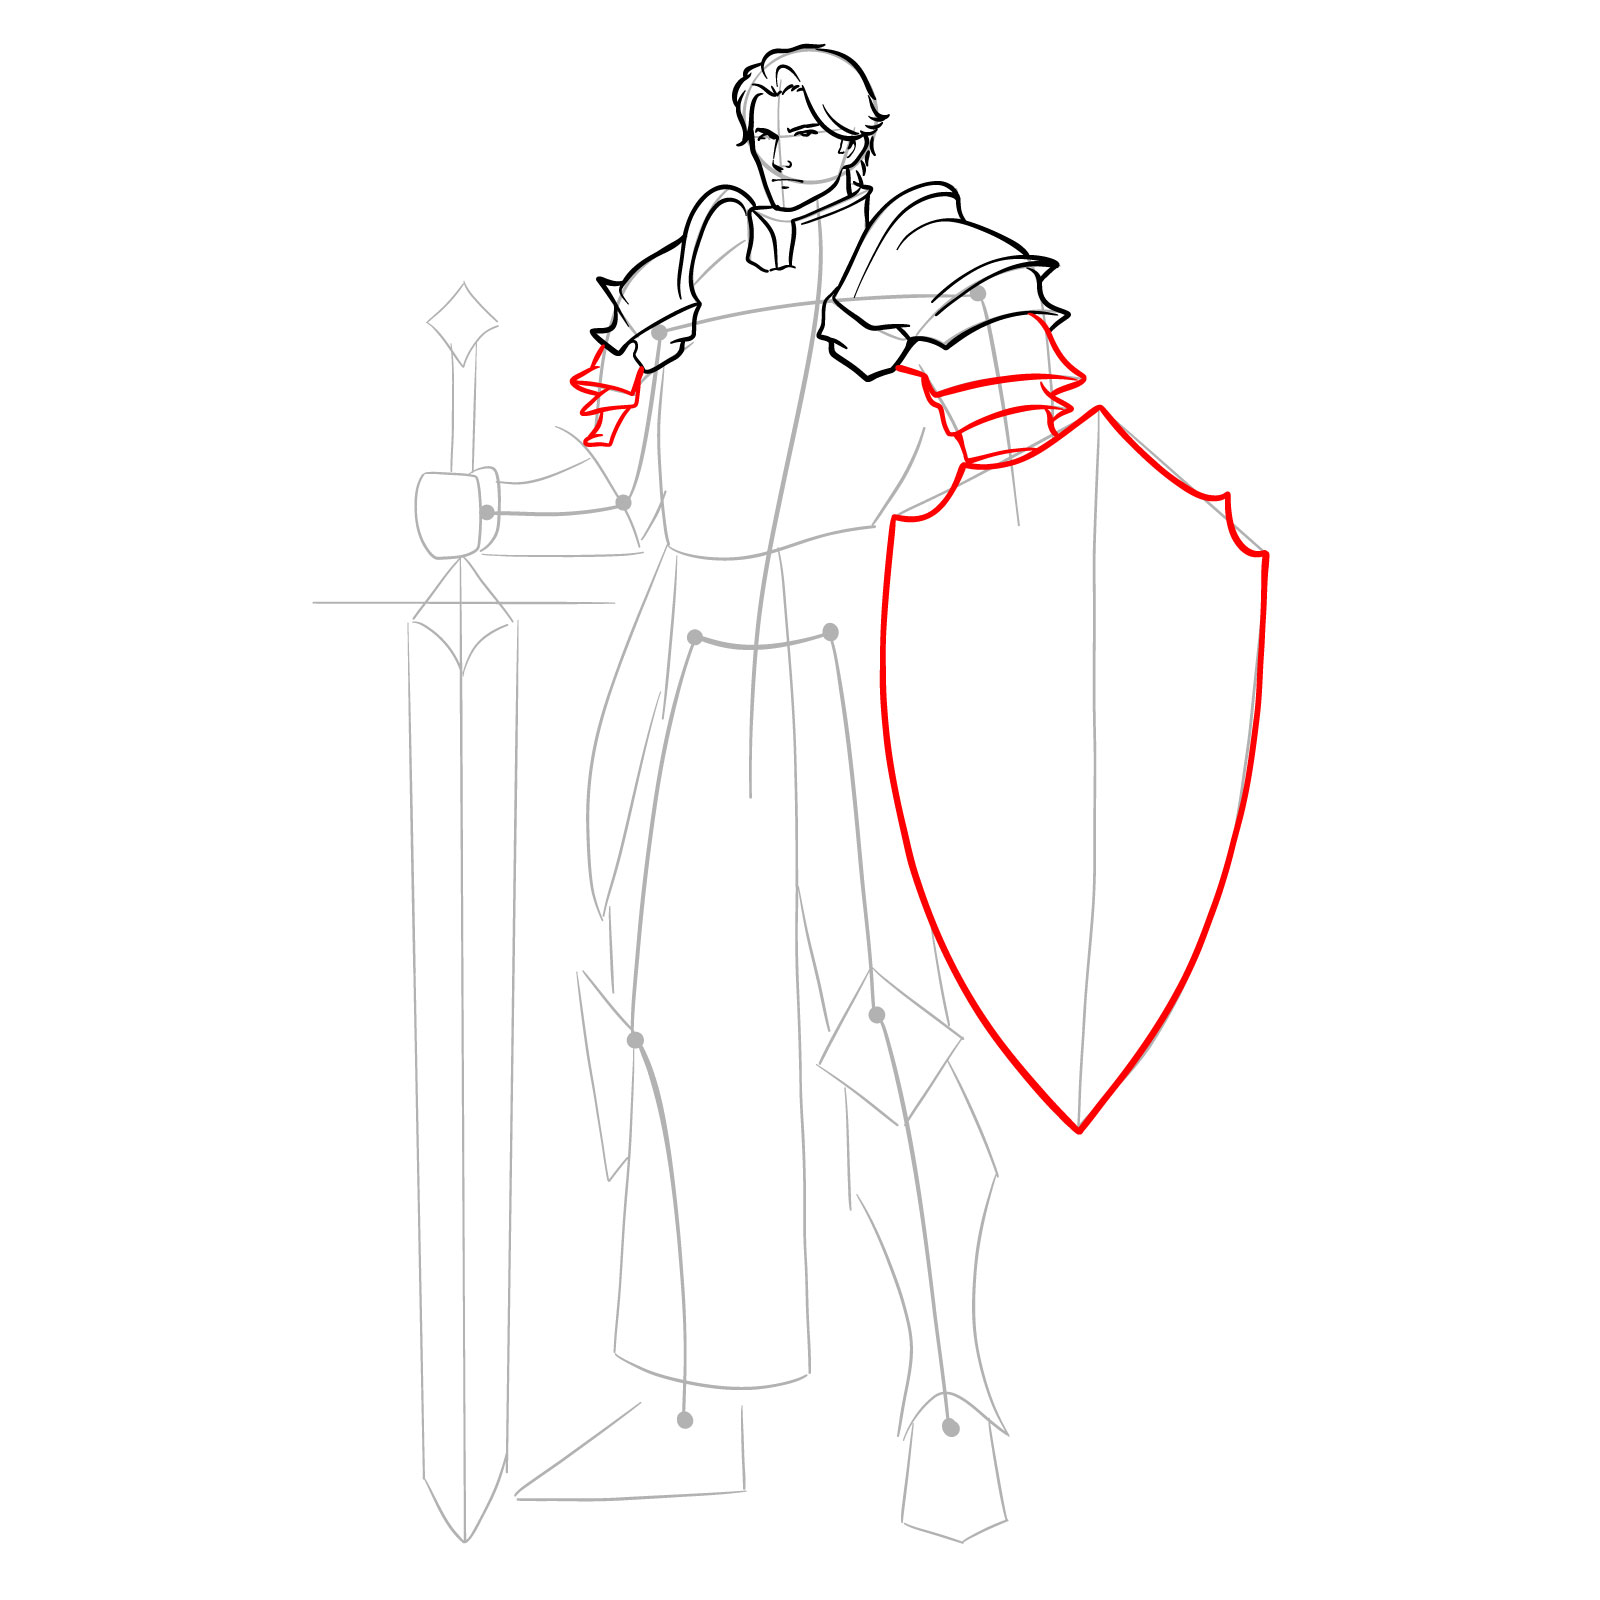 Sketching arm armor and refining the shield outline - step 11